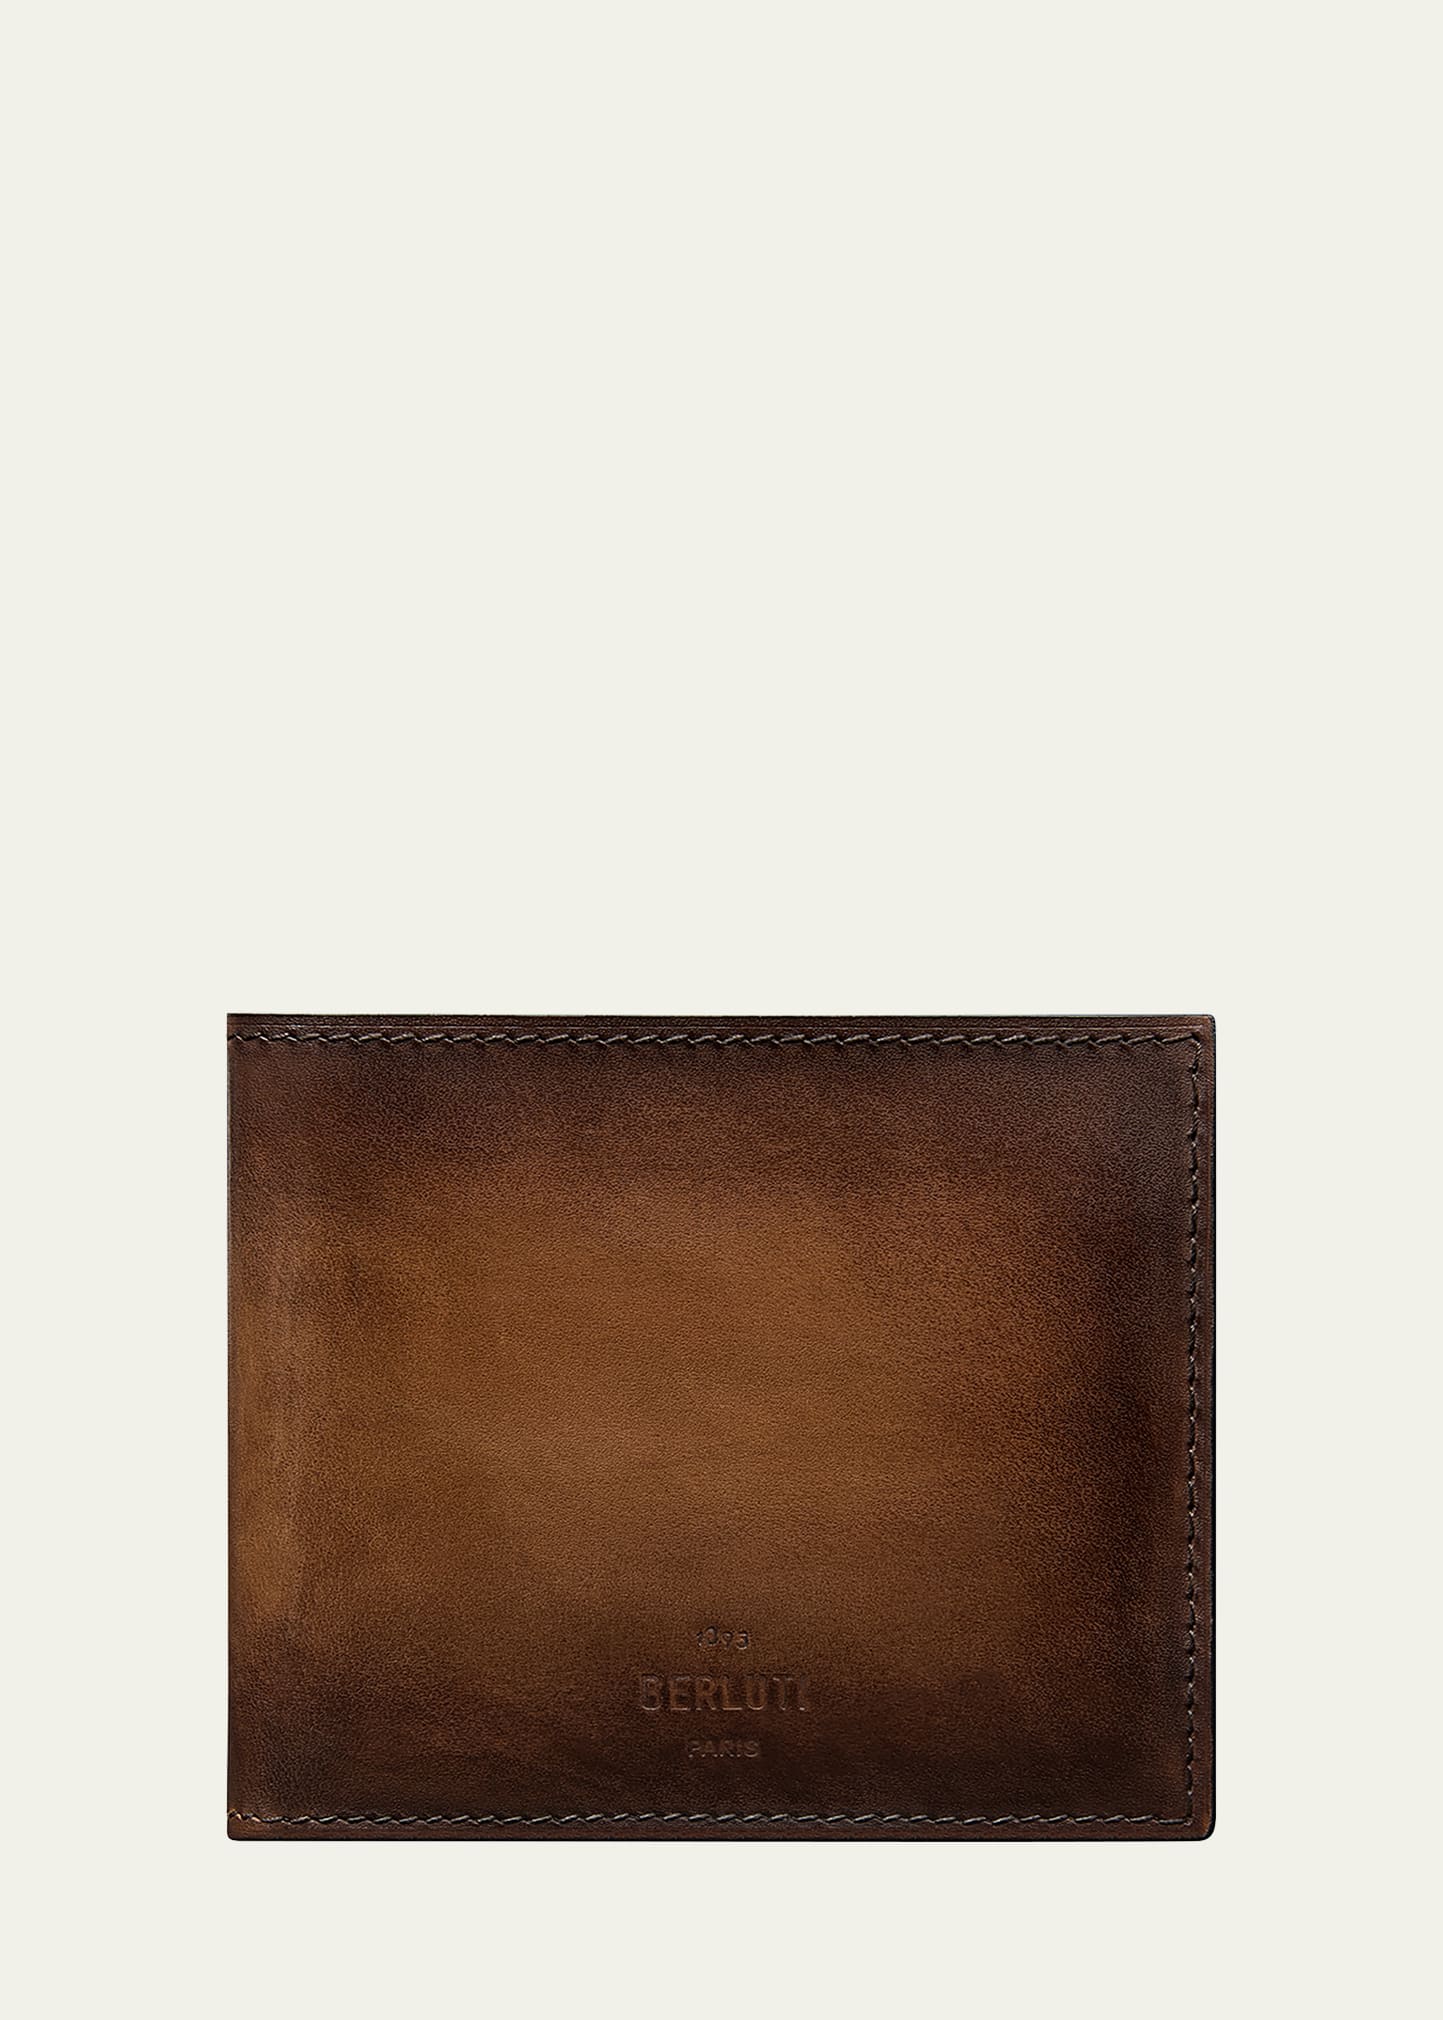 Berluti Men's Makore Leather Bifold Wallet In Cacao Intenso